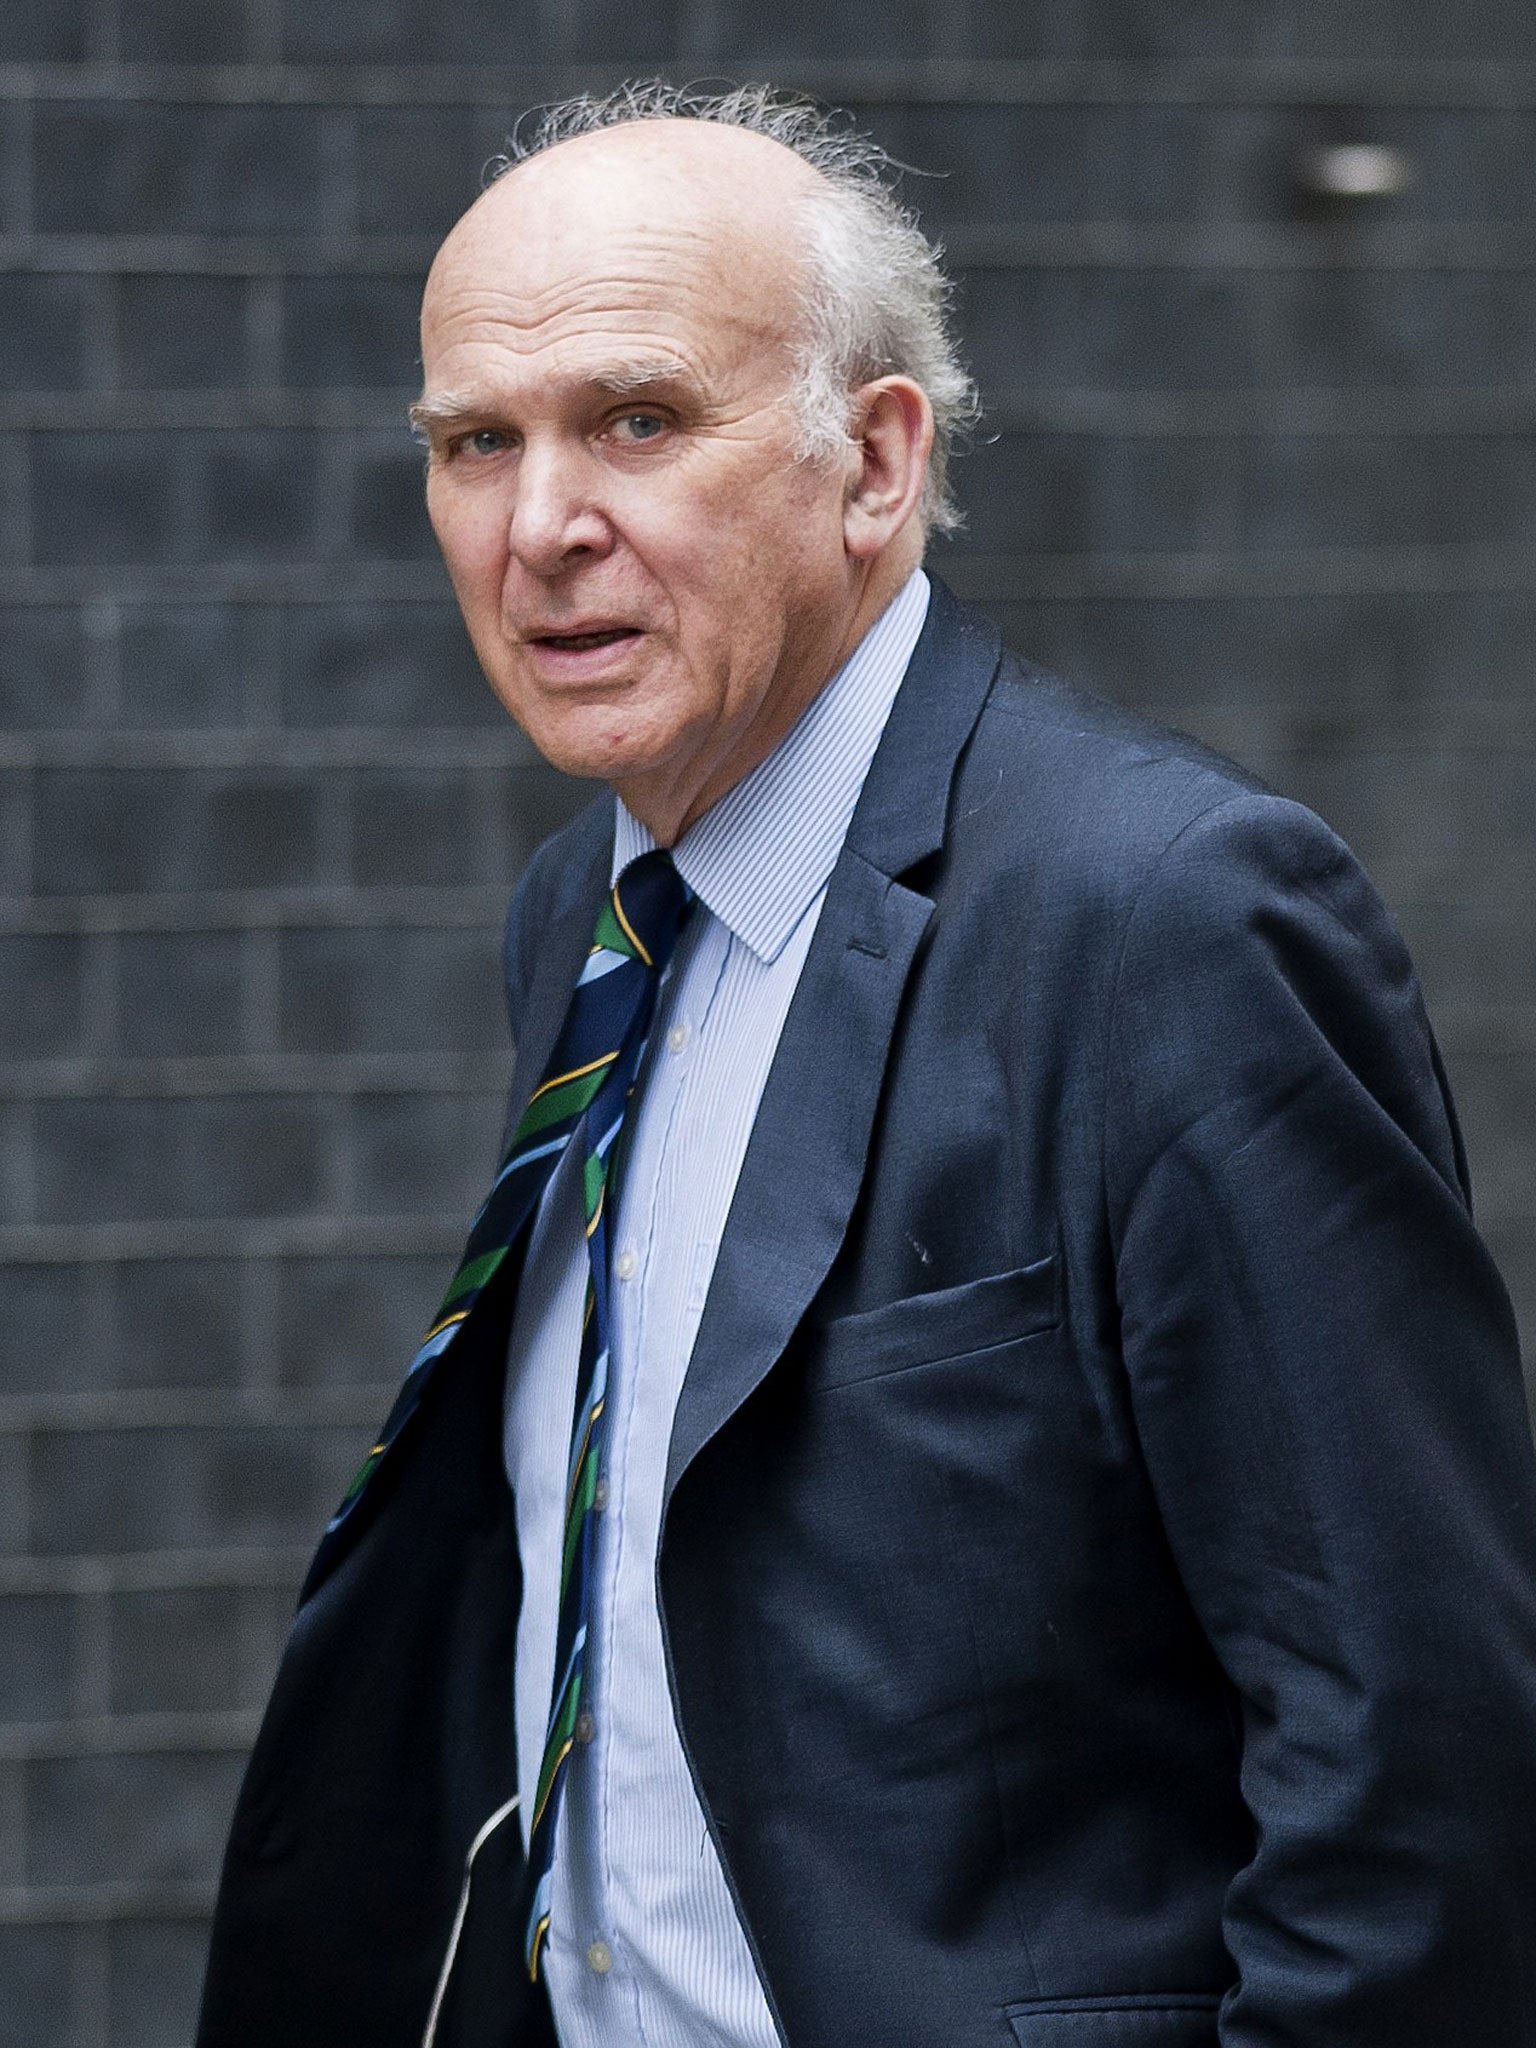 Vince Cable will use his talks in Russia to address concerns over the activists' treatment